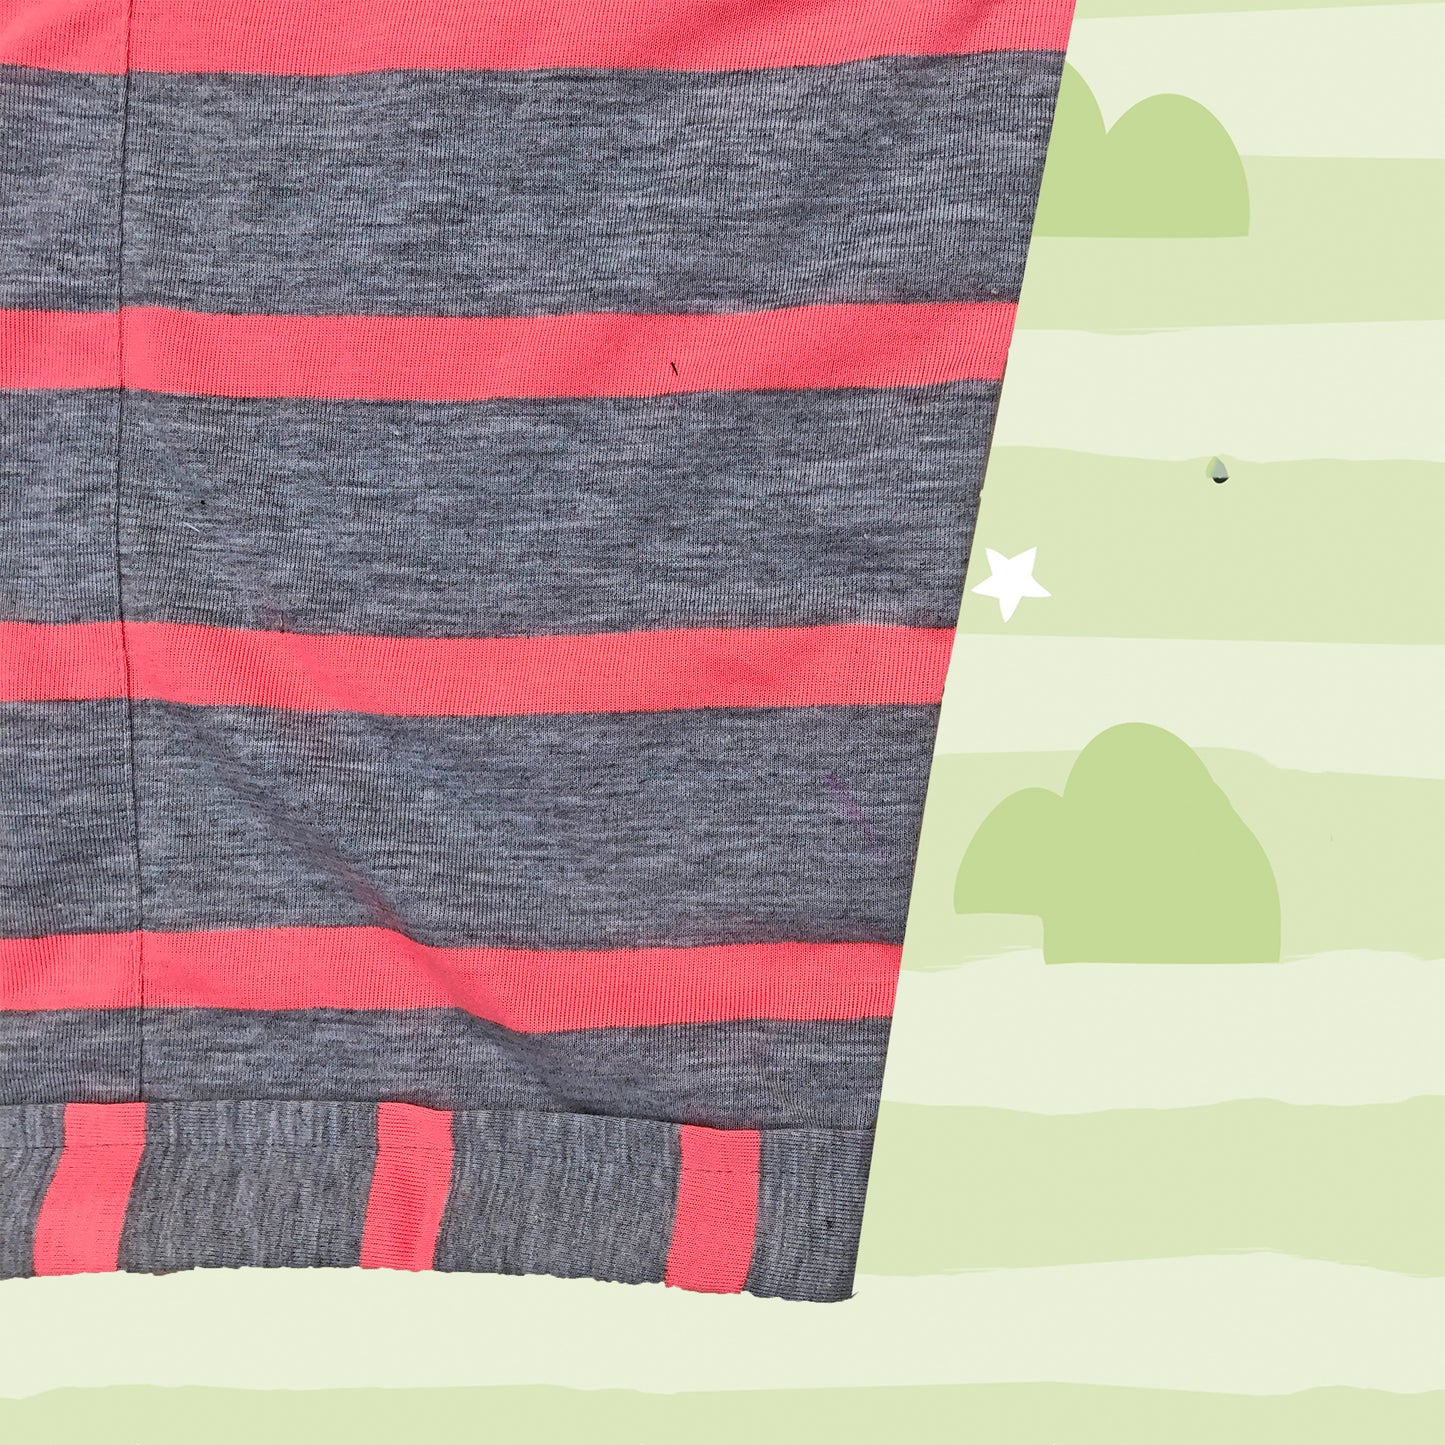 Pink Striped Cotton Lower